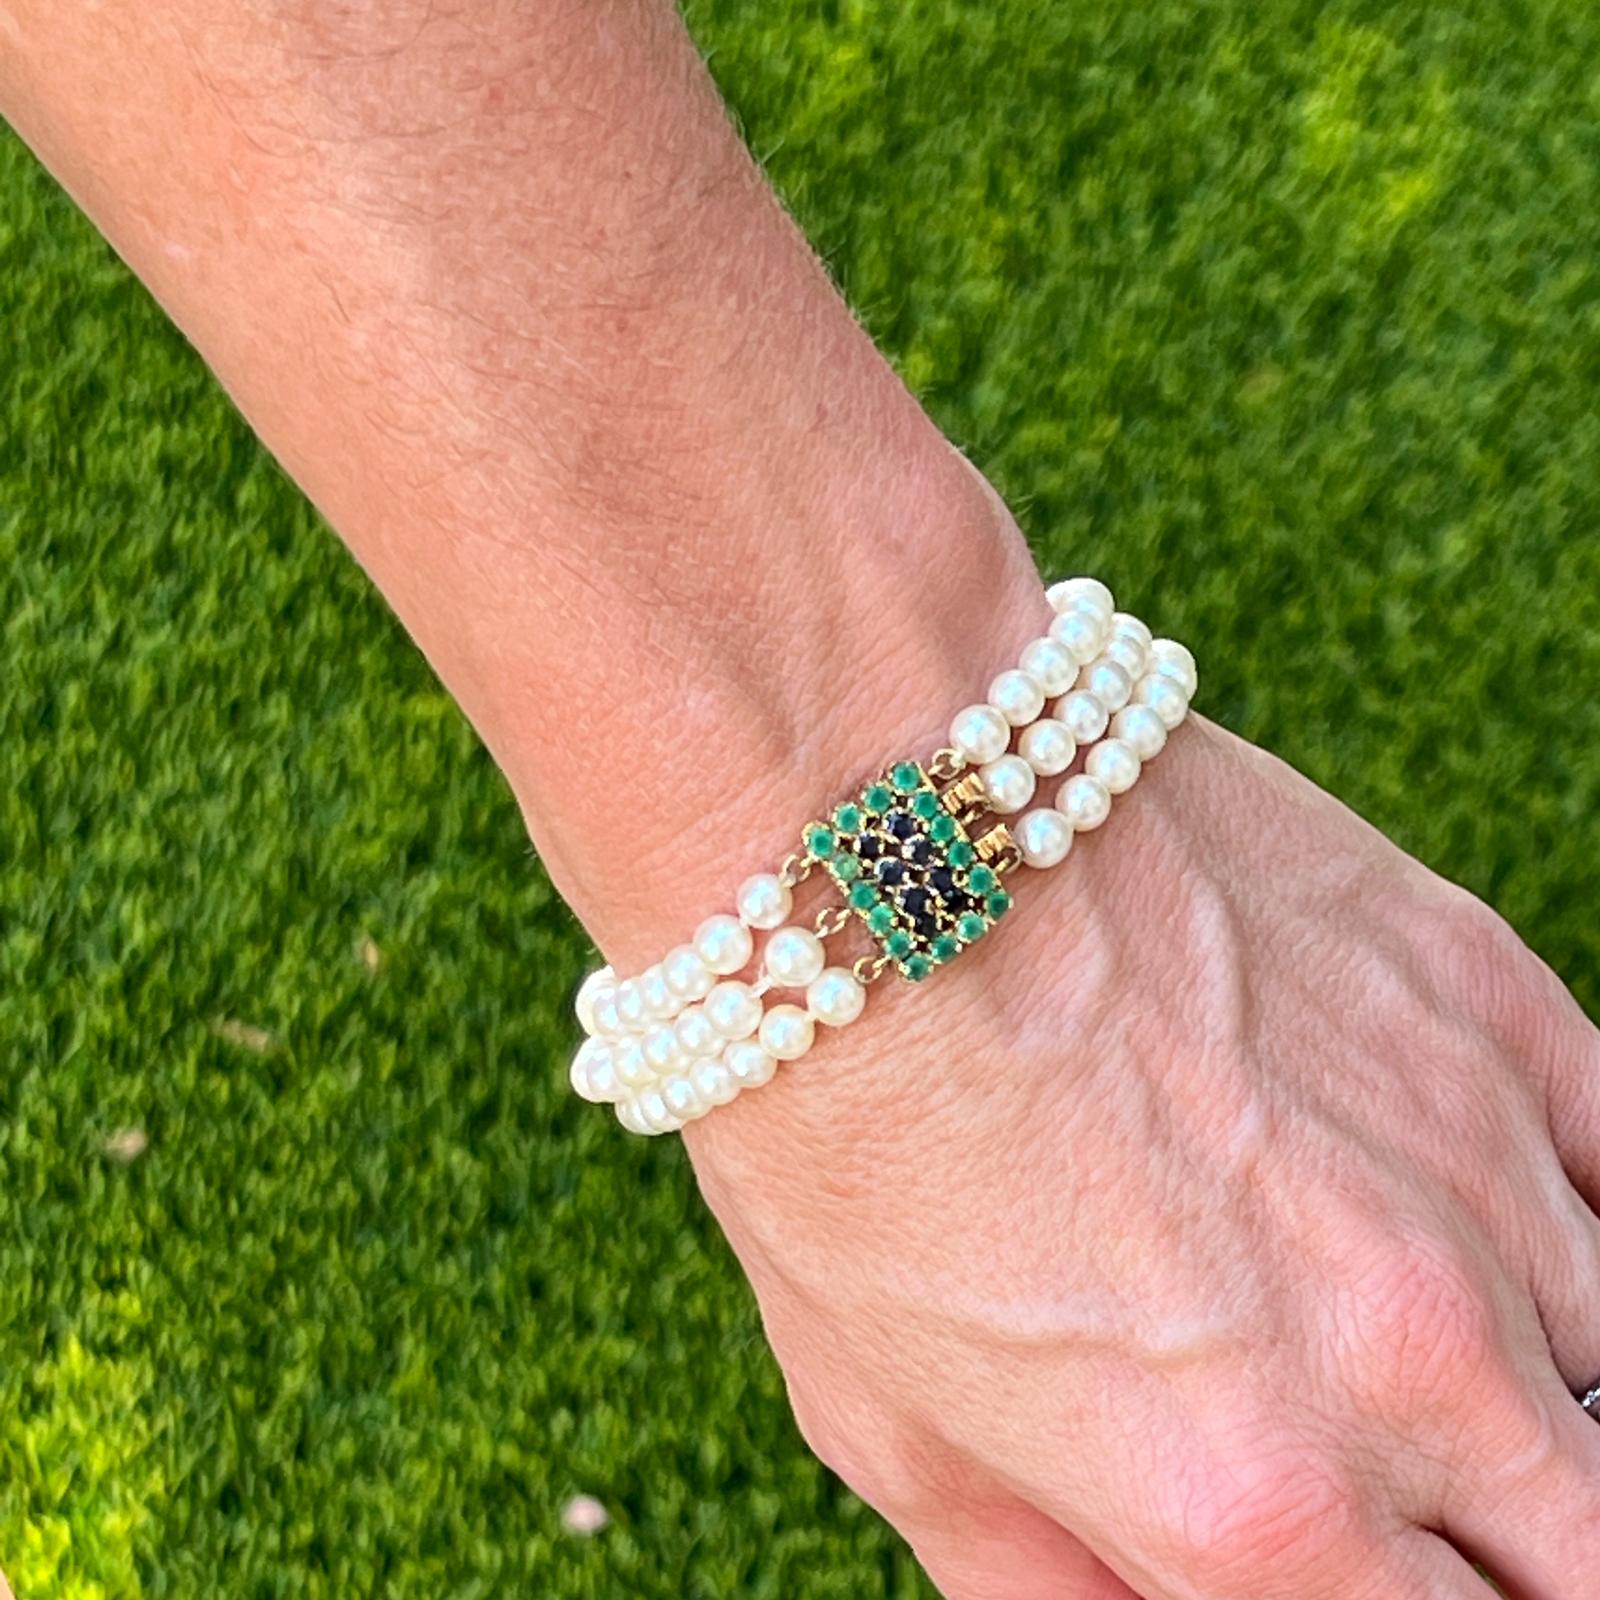 Mid twentieth century multi-strand pearl bracelet with a beautiful sapphire and emerald clasp. The three strands of cultured white pearls feature a rectangular 14 karat yellow gold clasp set with round cut blue sapphires and emeralds. The clasp